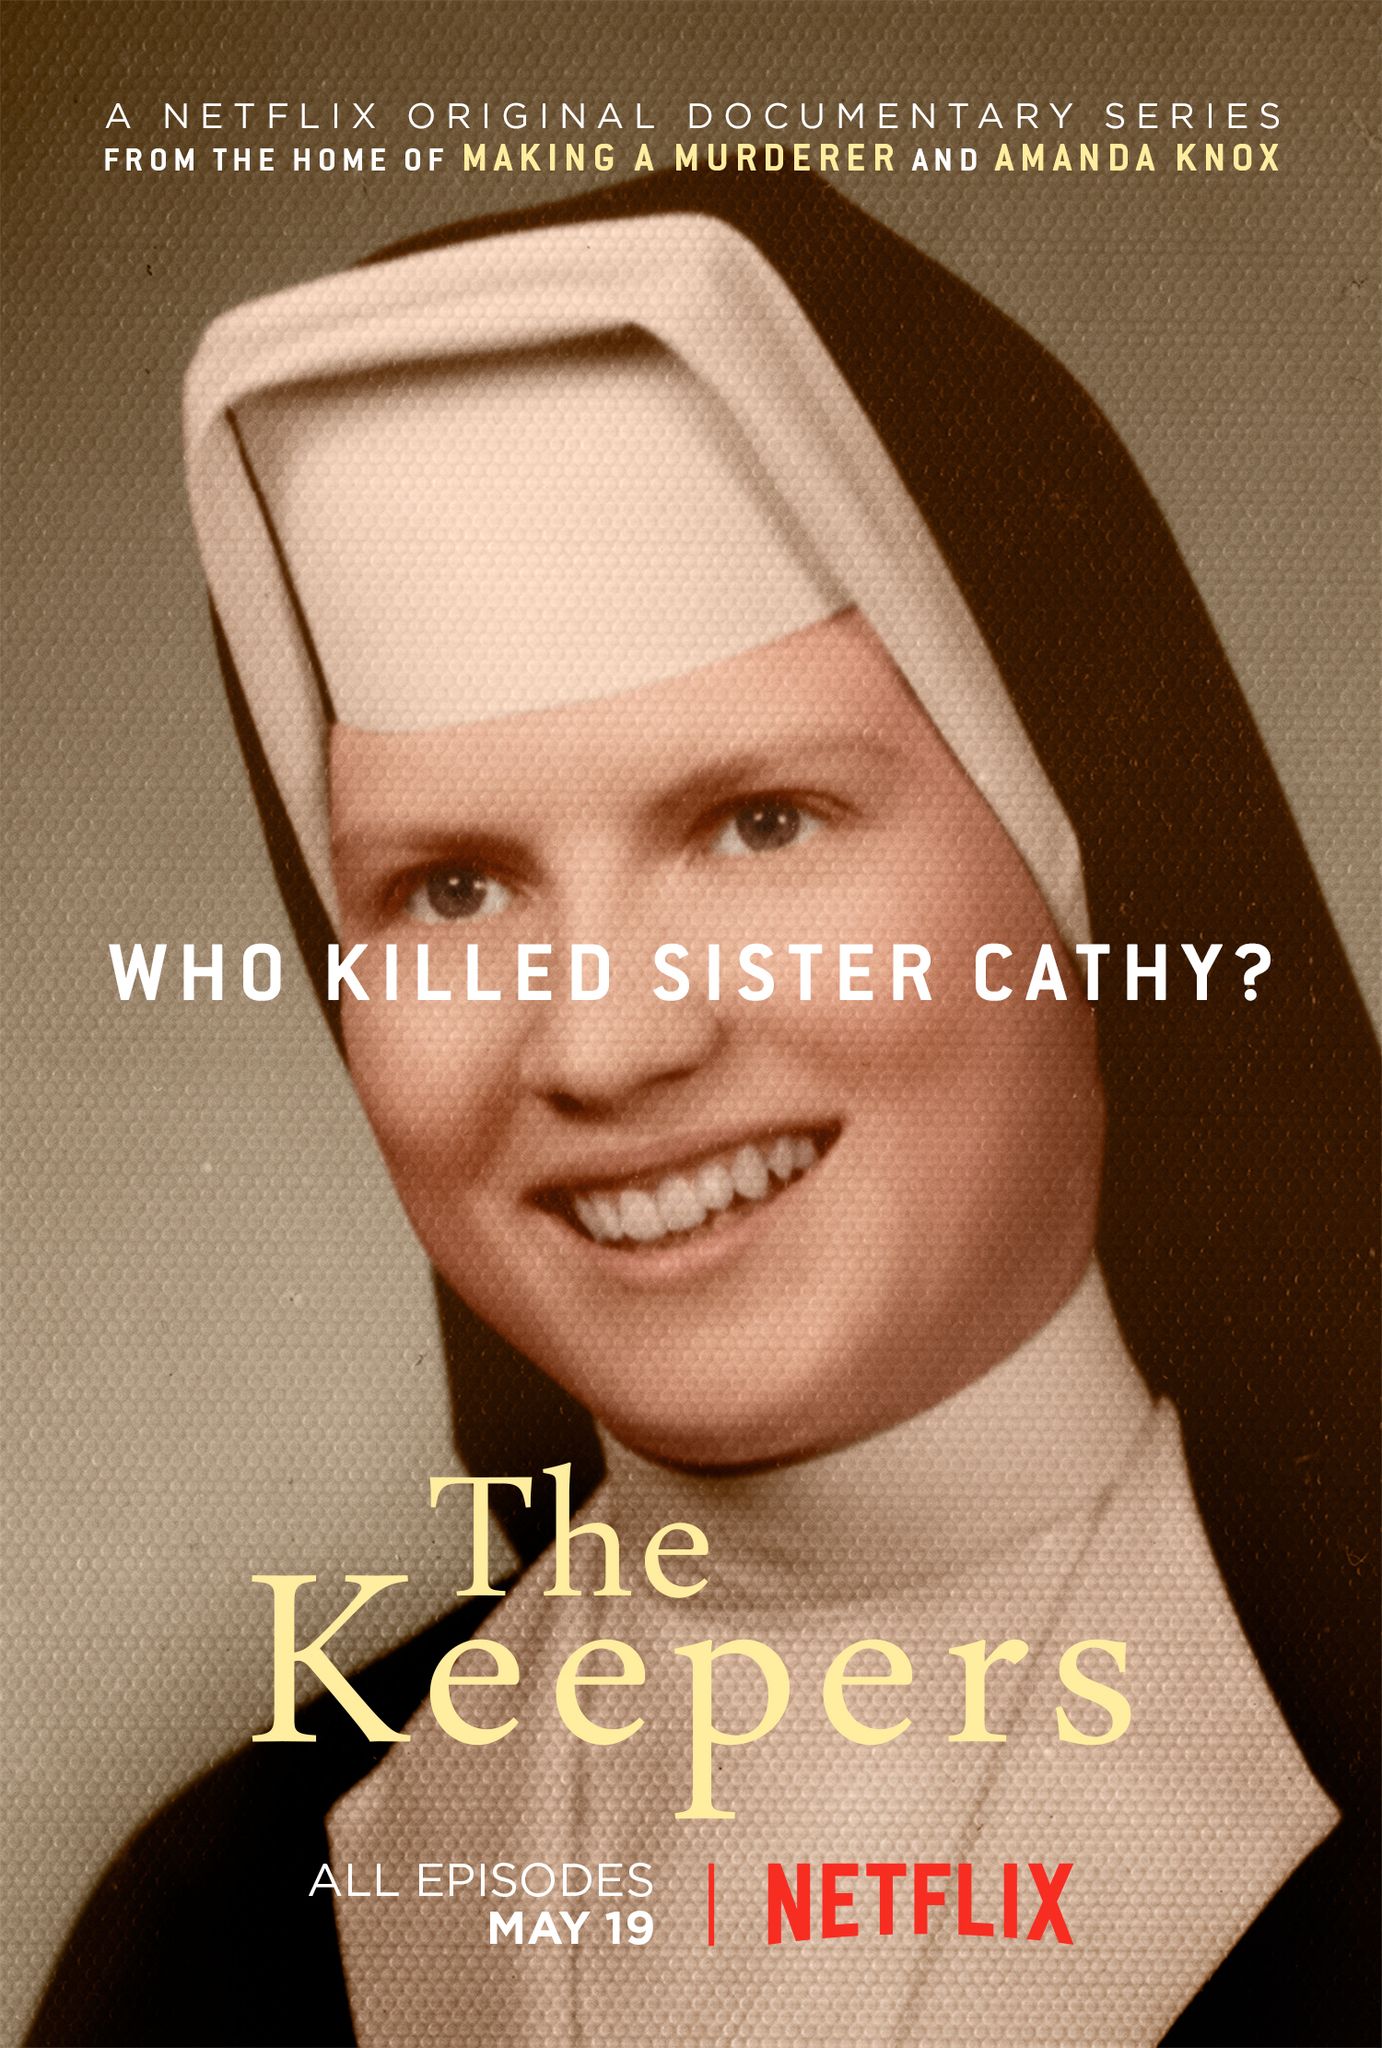 The Keepers Netflix Poster